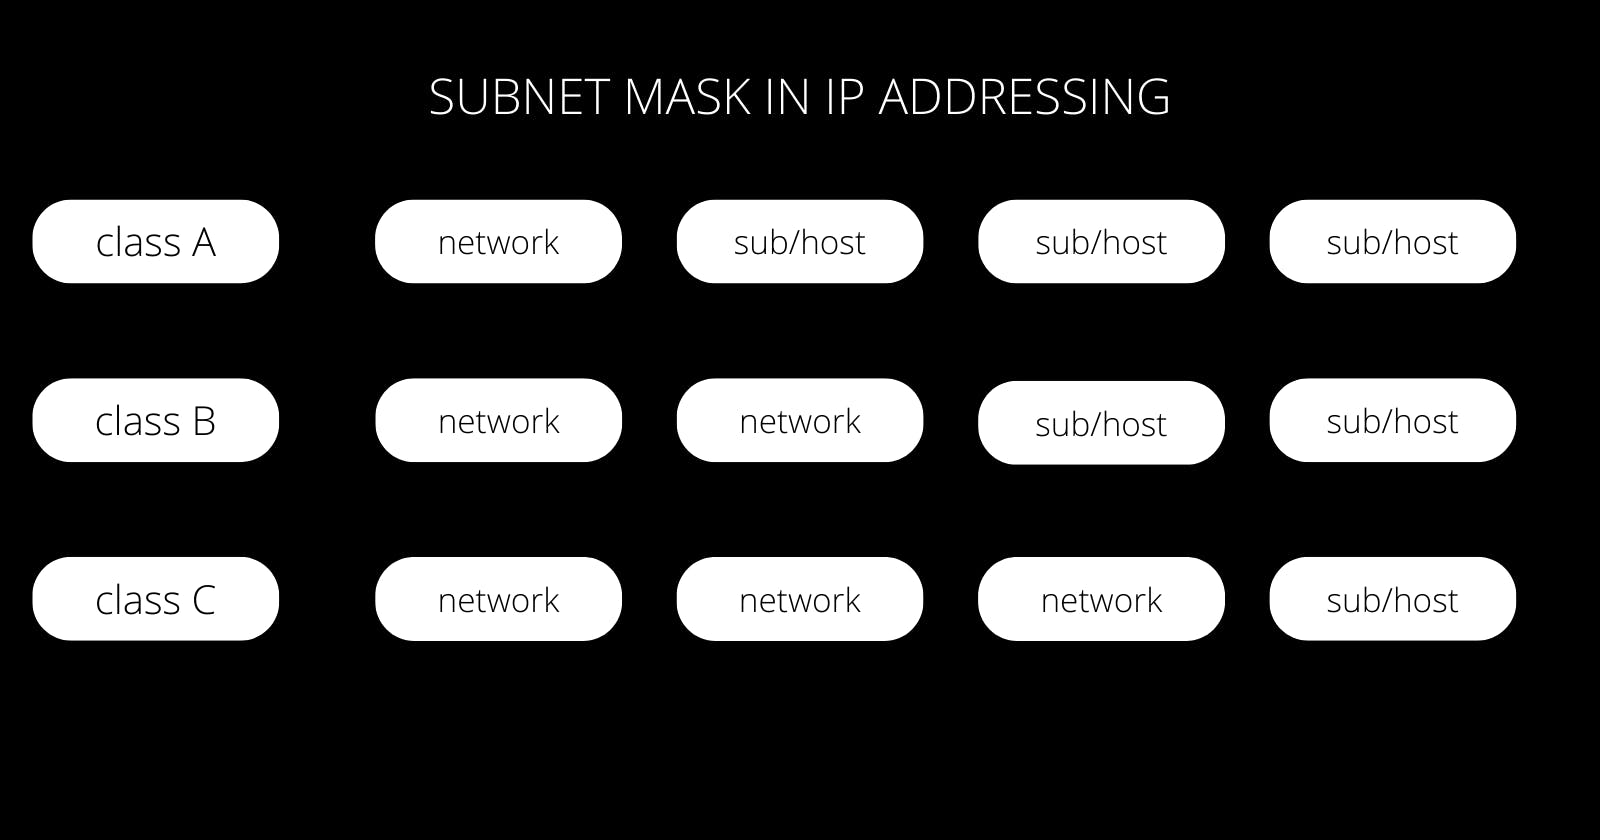 SUBNET MASK IN IP ADDRESSING.png